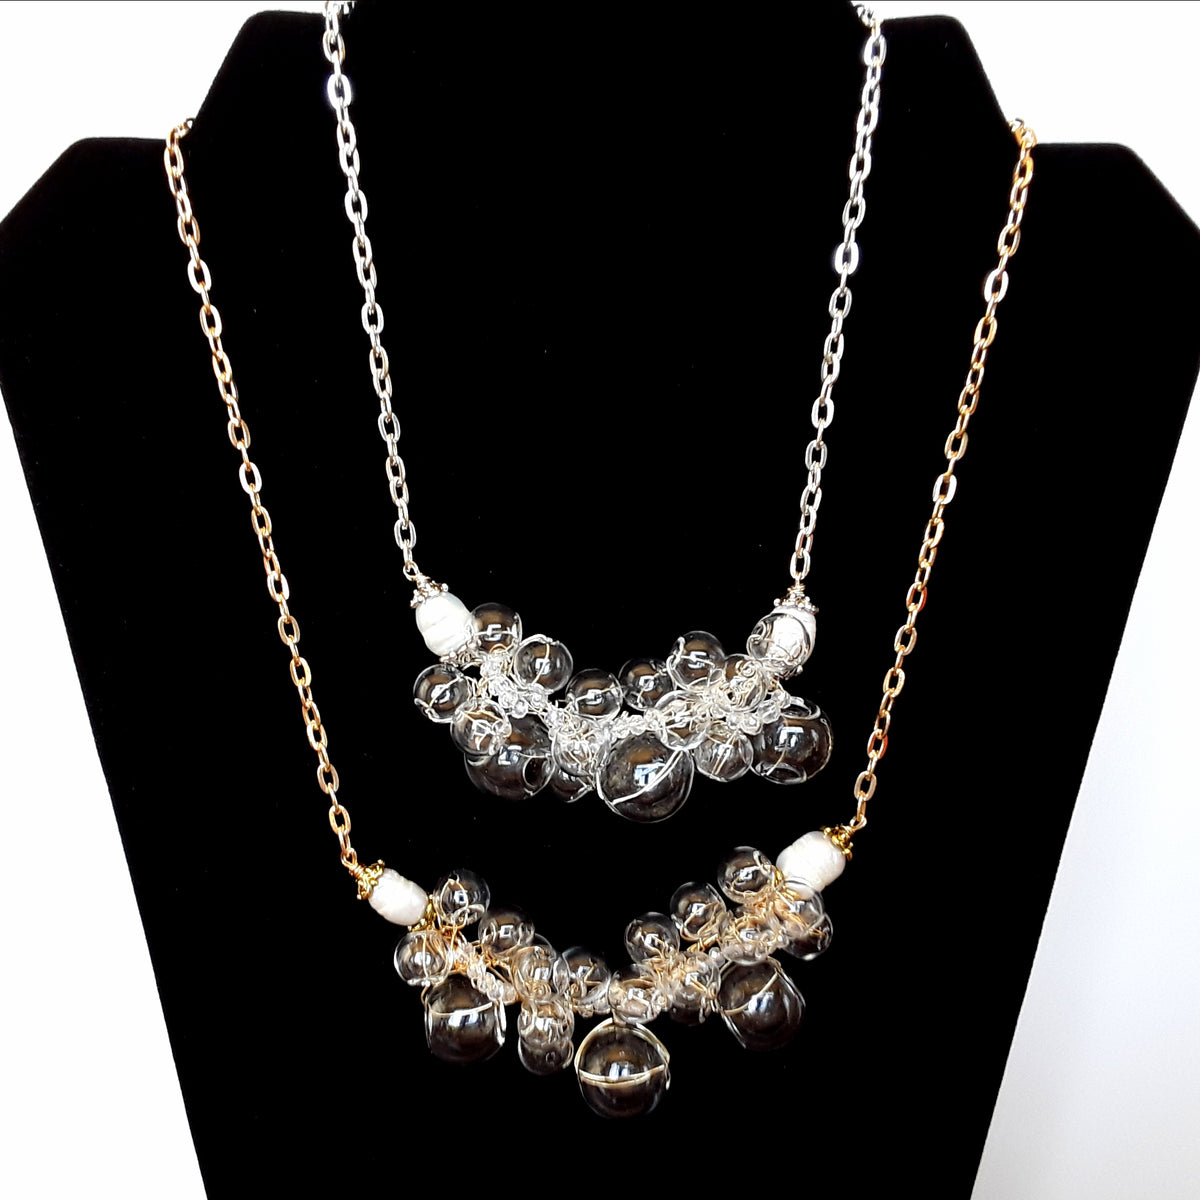 Bridal Clear Blown Glass Statement Necklace in Gold or Silver - Twisted Wire Cluster Bib